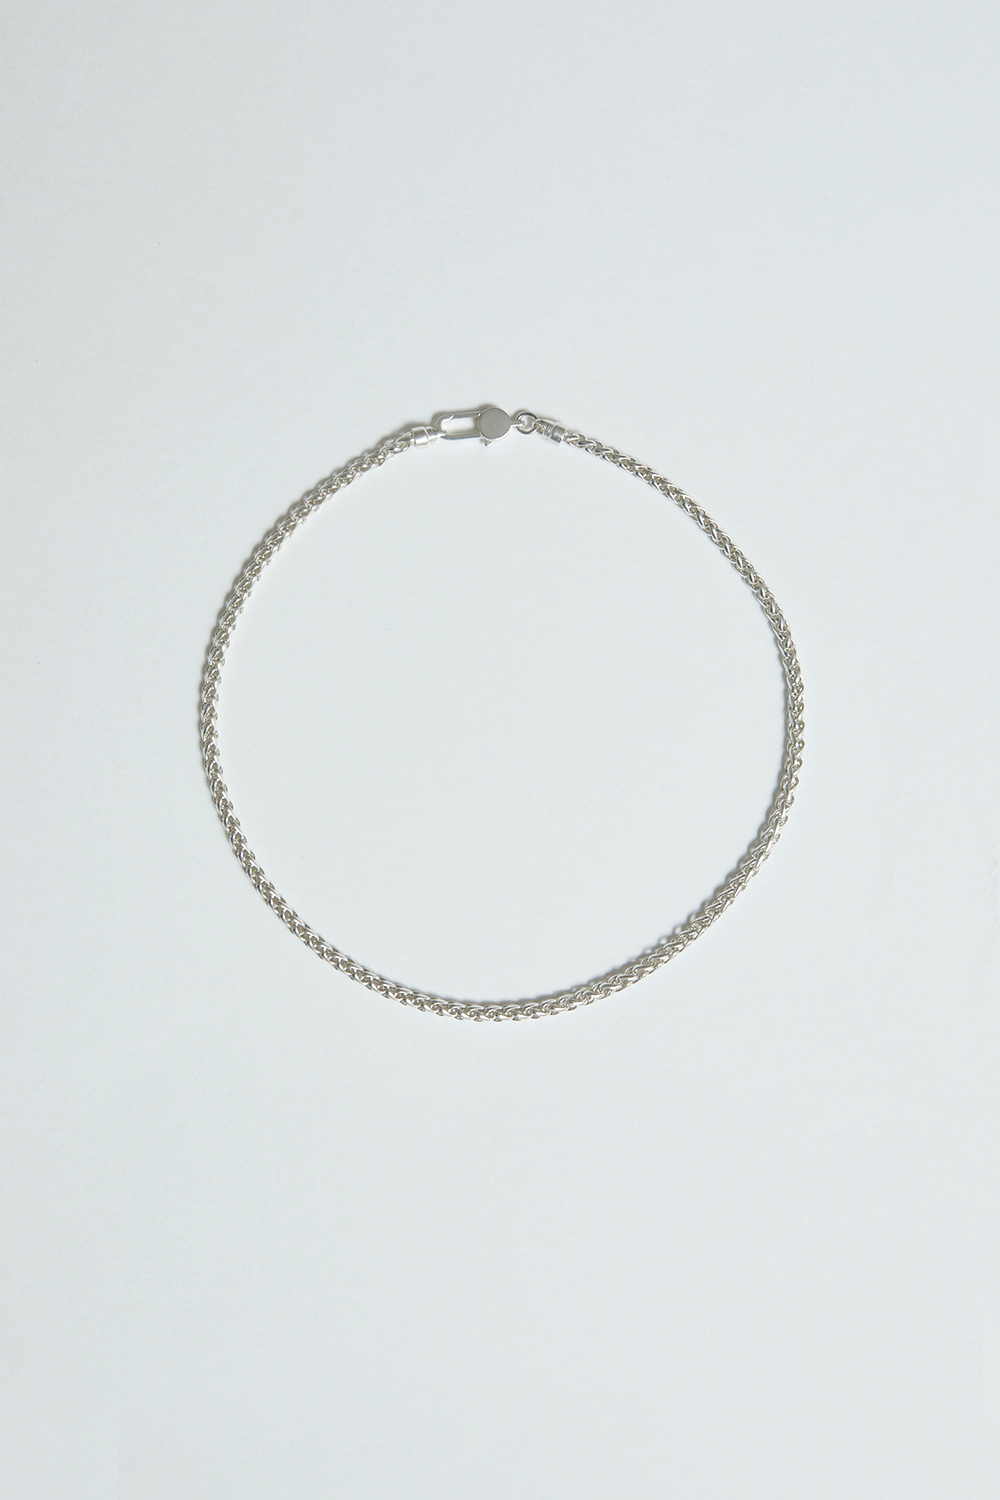 White Night Necklace (Only Chain)